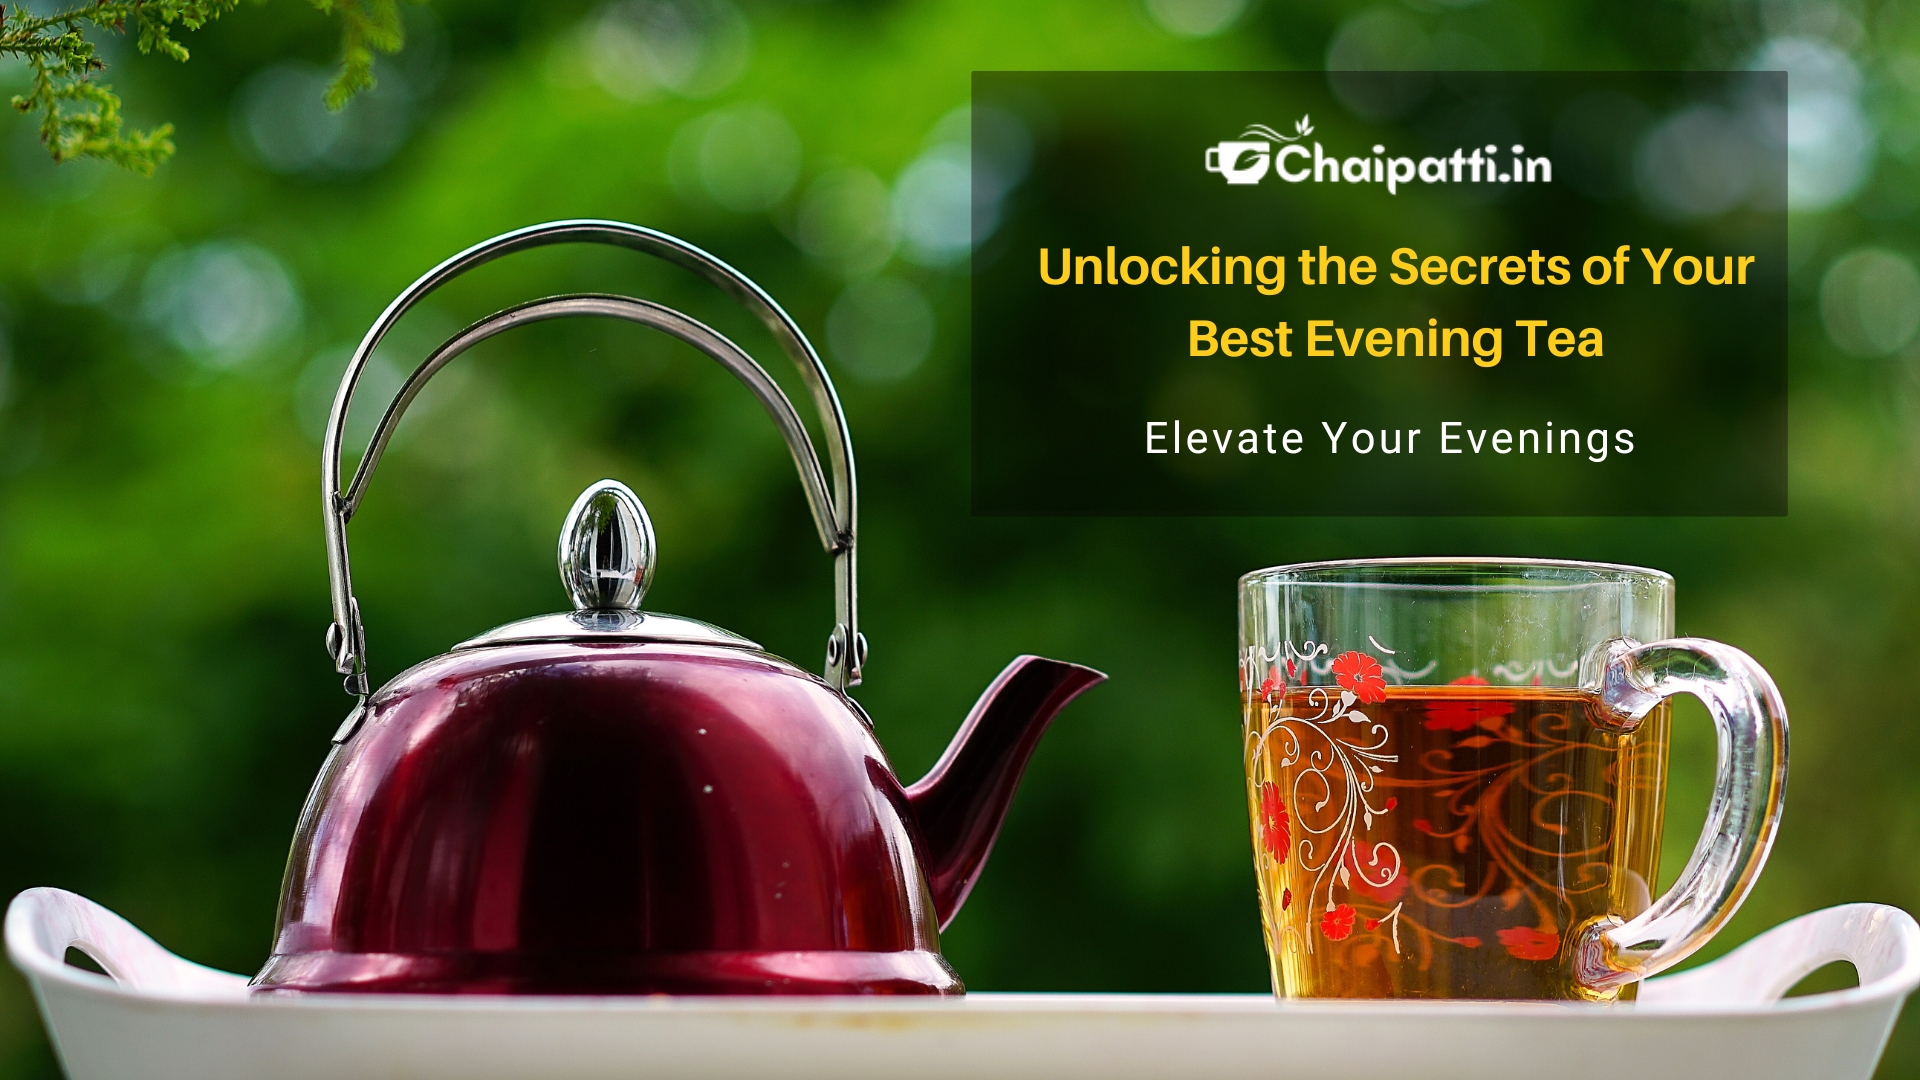 Elevate Your Evenings: Unlocking the Secrets of Your Best Evening Tea